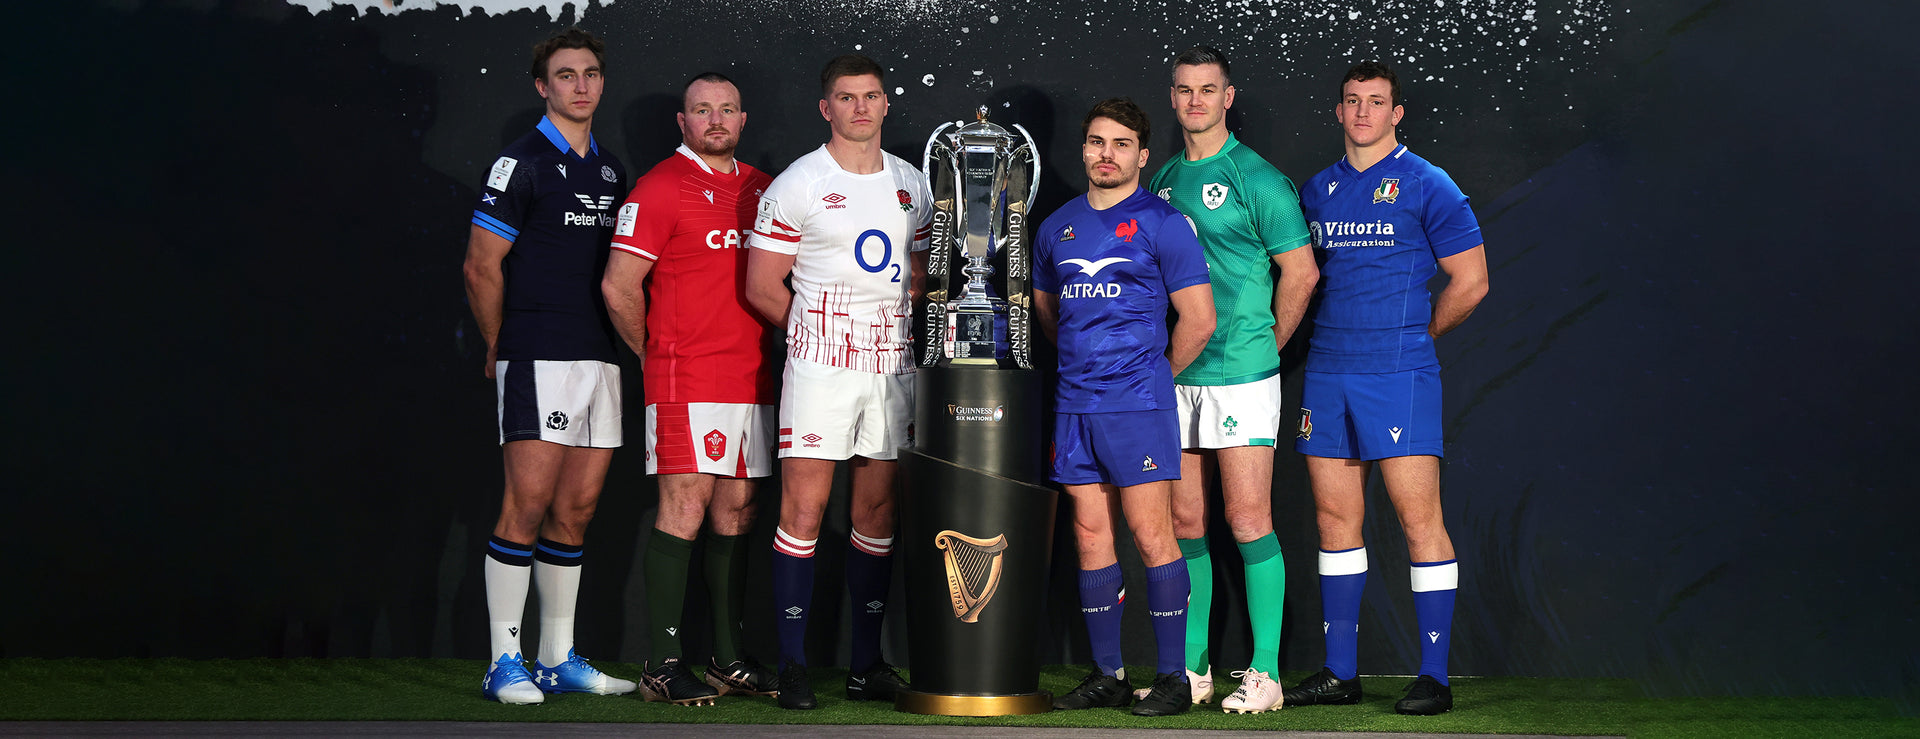 The Smart Ball has landed at the Guinness Six Nations!